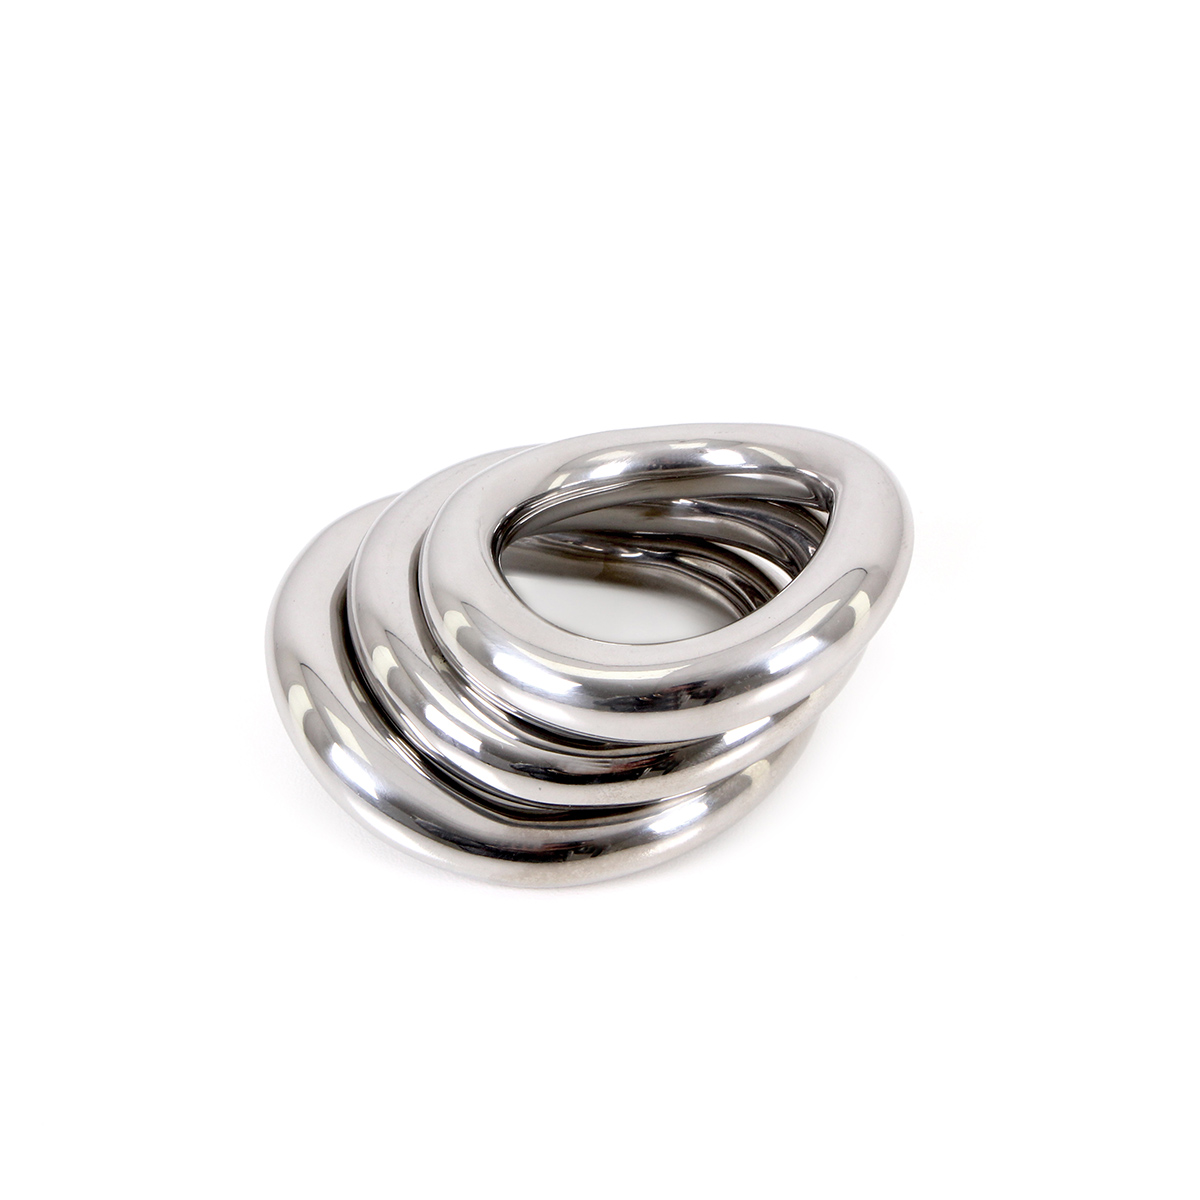 Costum-Fit-Cockring-45-mm-OPR-277045-5